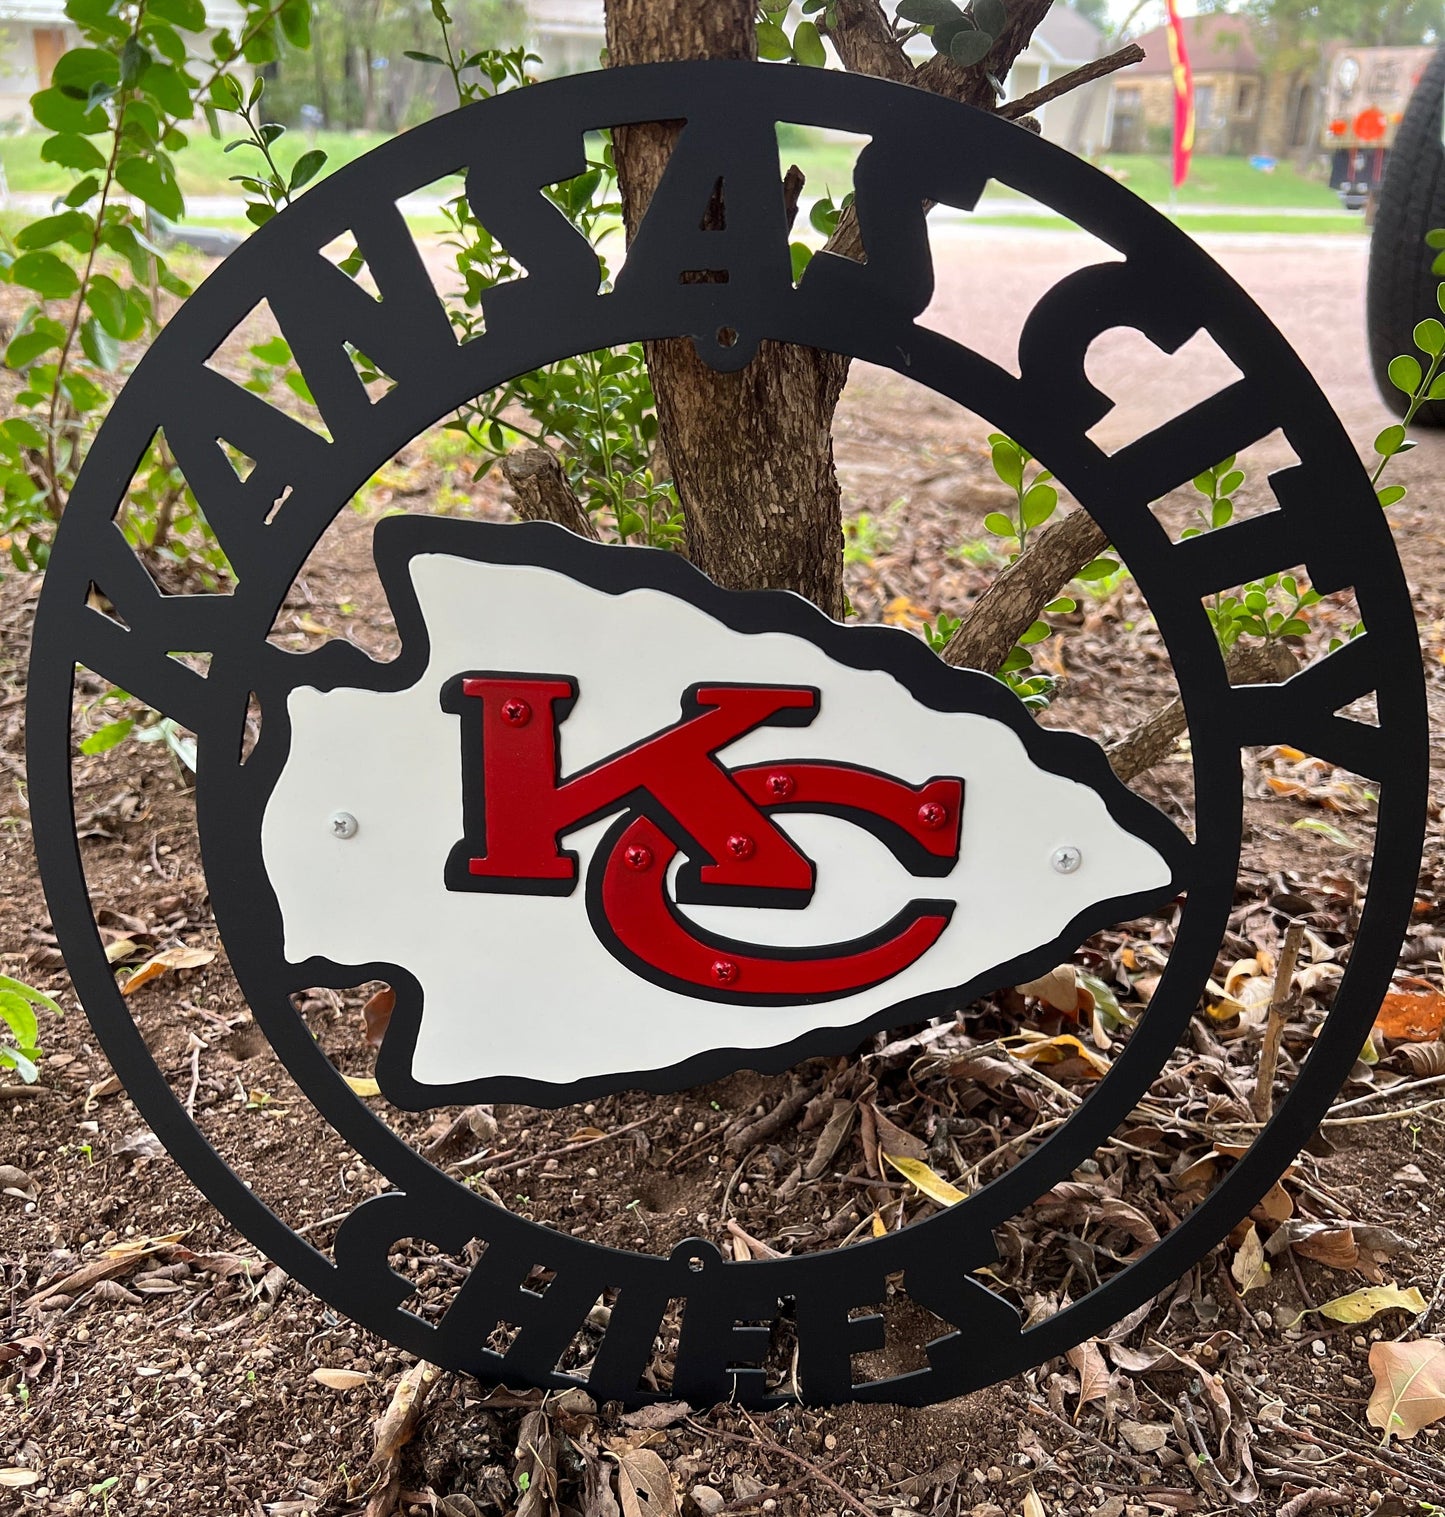 Rusty Rooster Fabrication & Design Physical product Kansas City Chiefs - Metal Sign A57